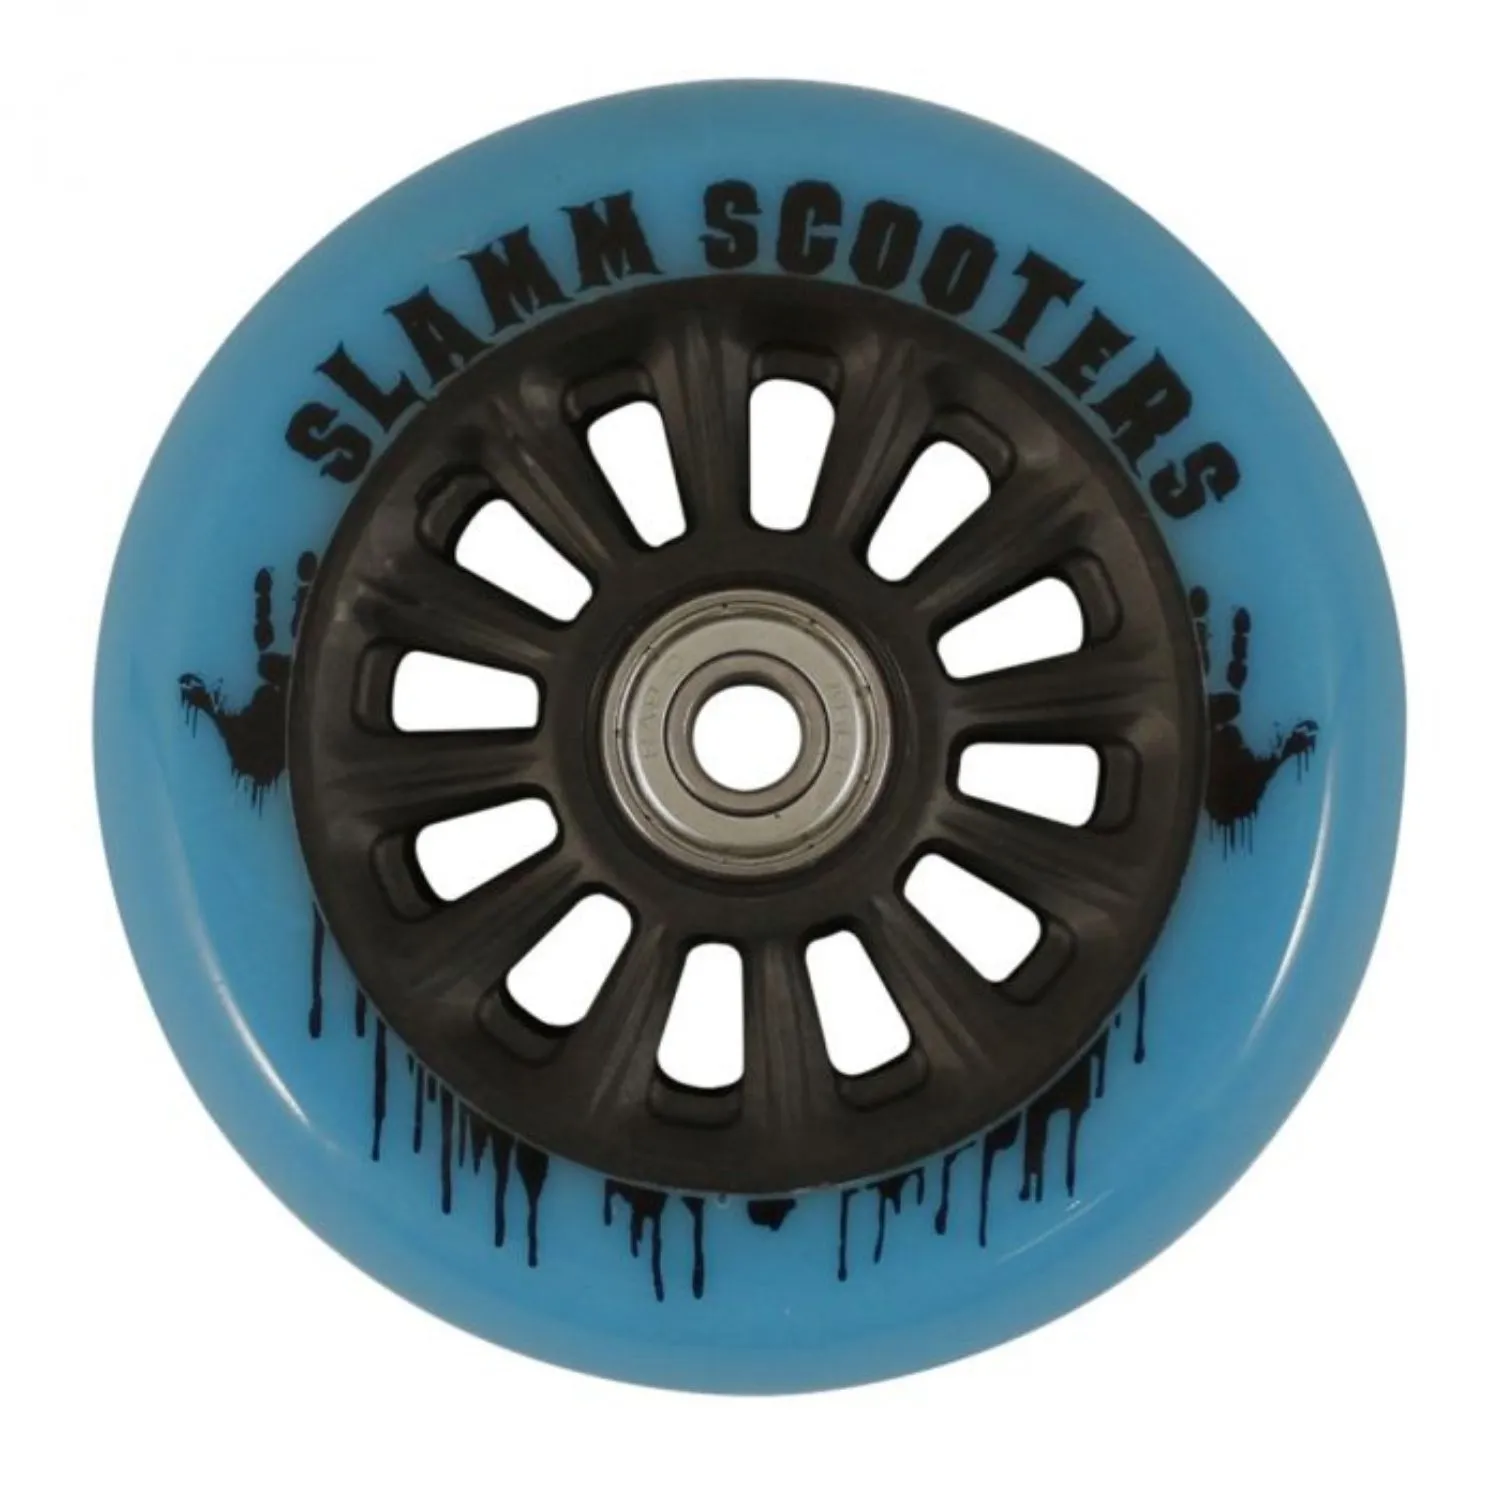 Slamm Nycore Plastic Wheel 100MM Excl. Lager step wielen